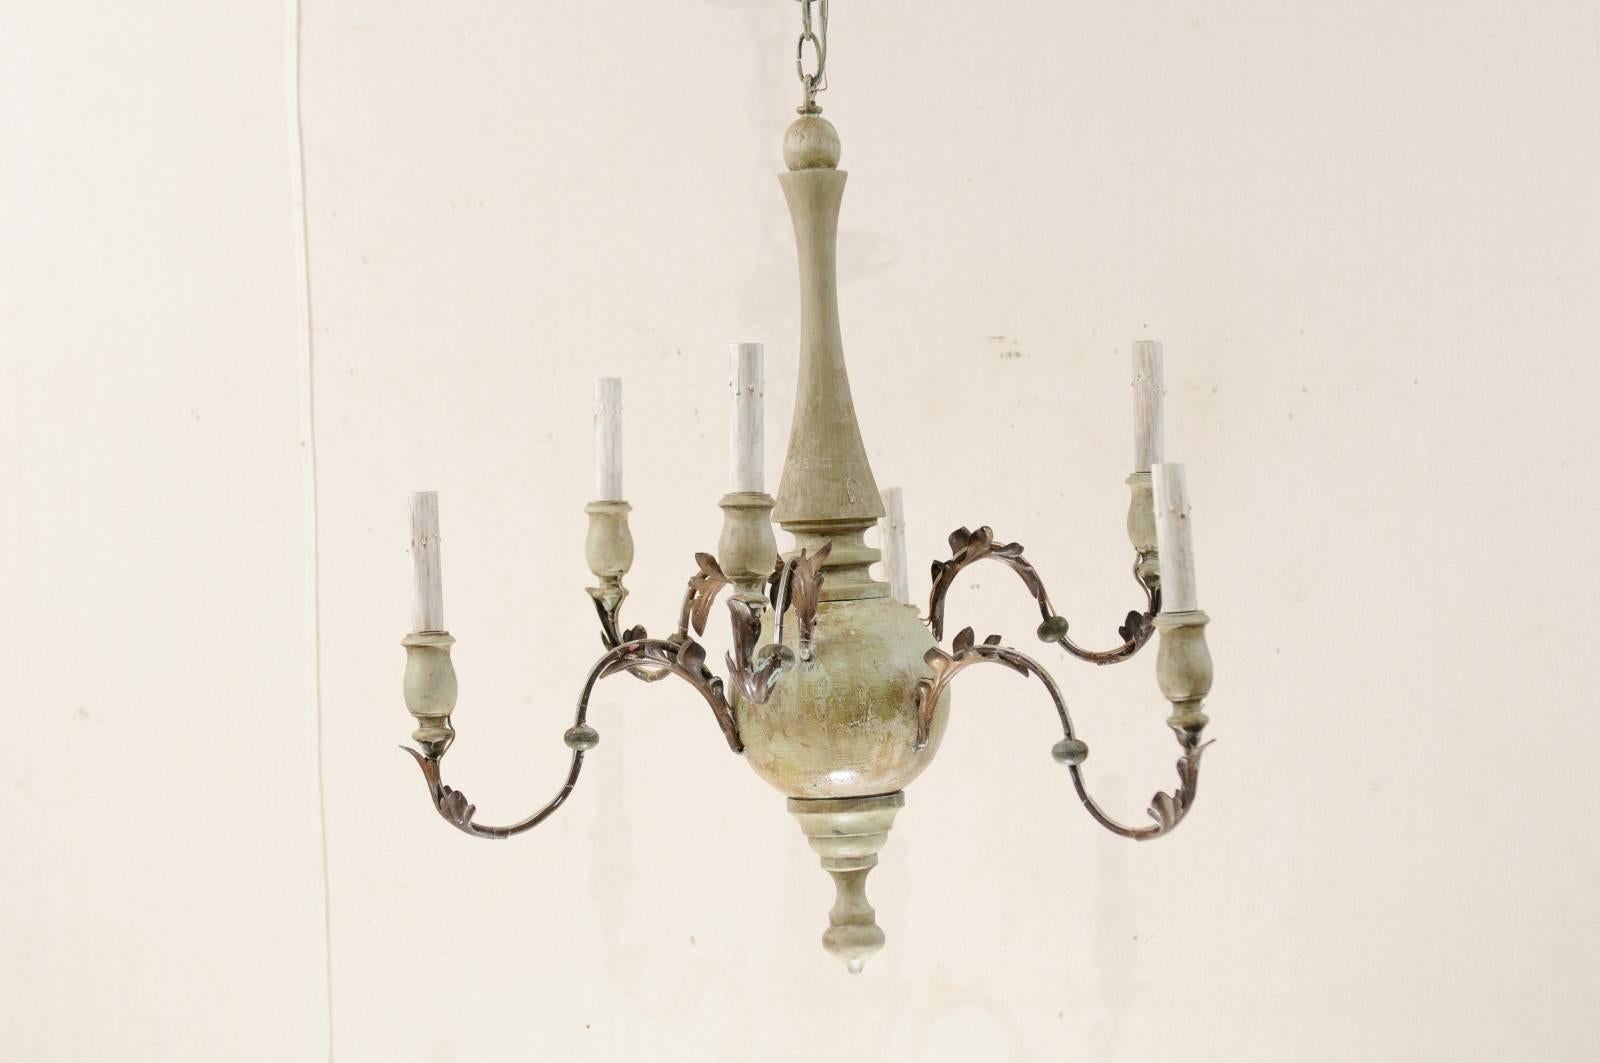 An Italian six-light painted wood and metal chandelier. This graceful mid-20th century Italian chandelier features a carved and painted wood column with metal swag arms extending out, at oscillating heights, from it's bulbous shaped centre. Each arm